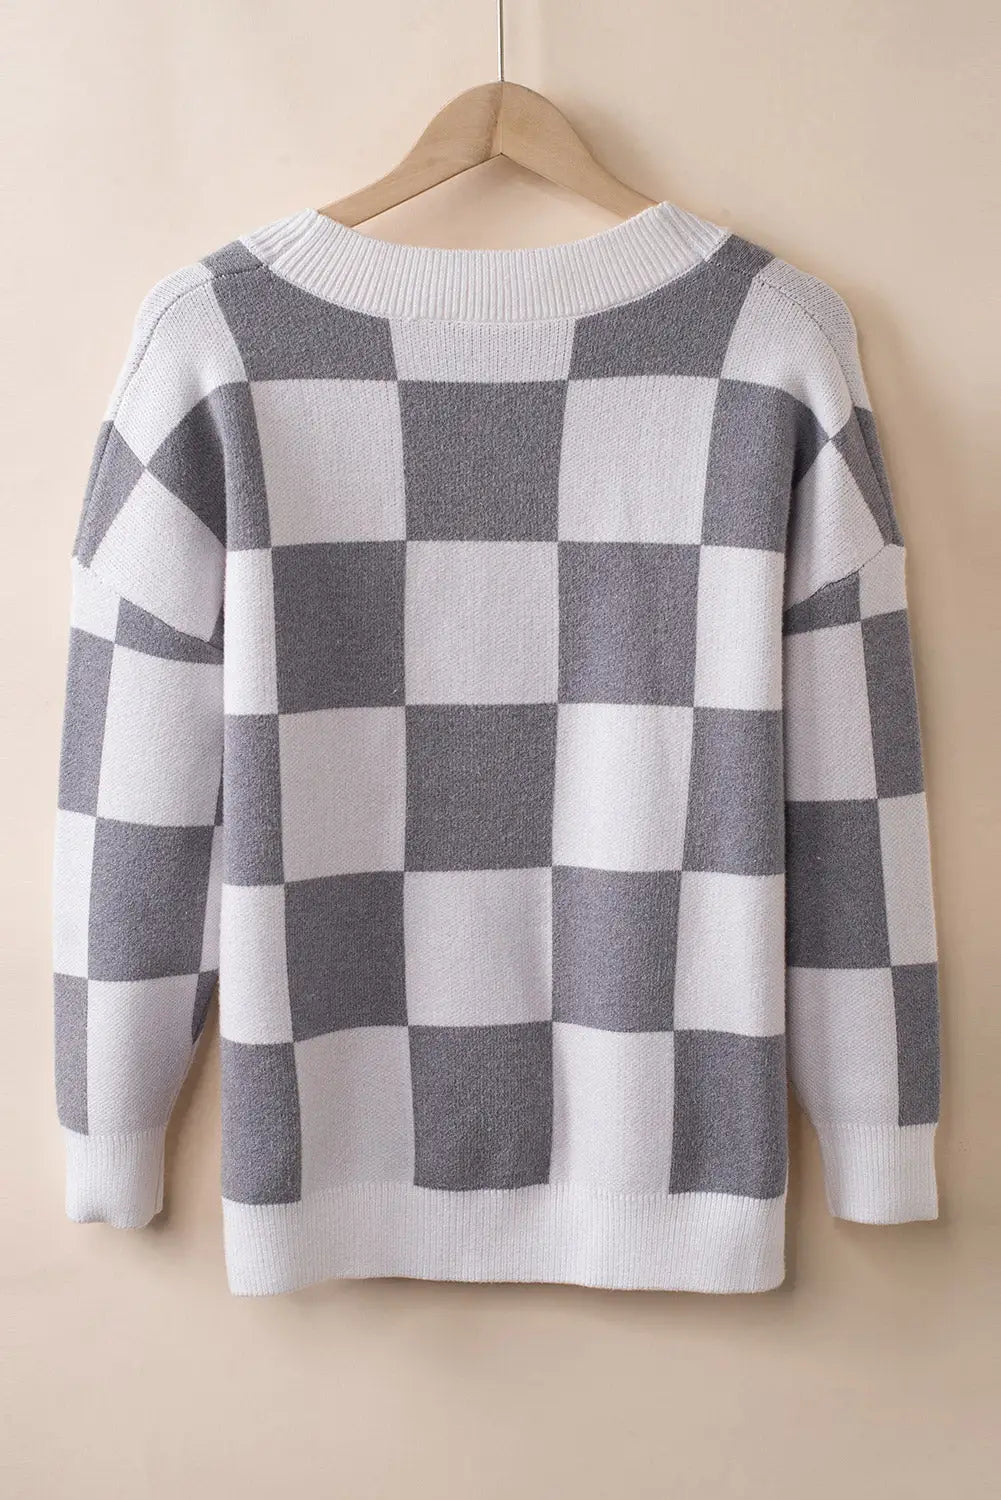 Gray contrast checkered print button up sweater cardigan - sweaters & cardigans